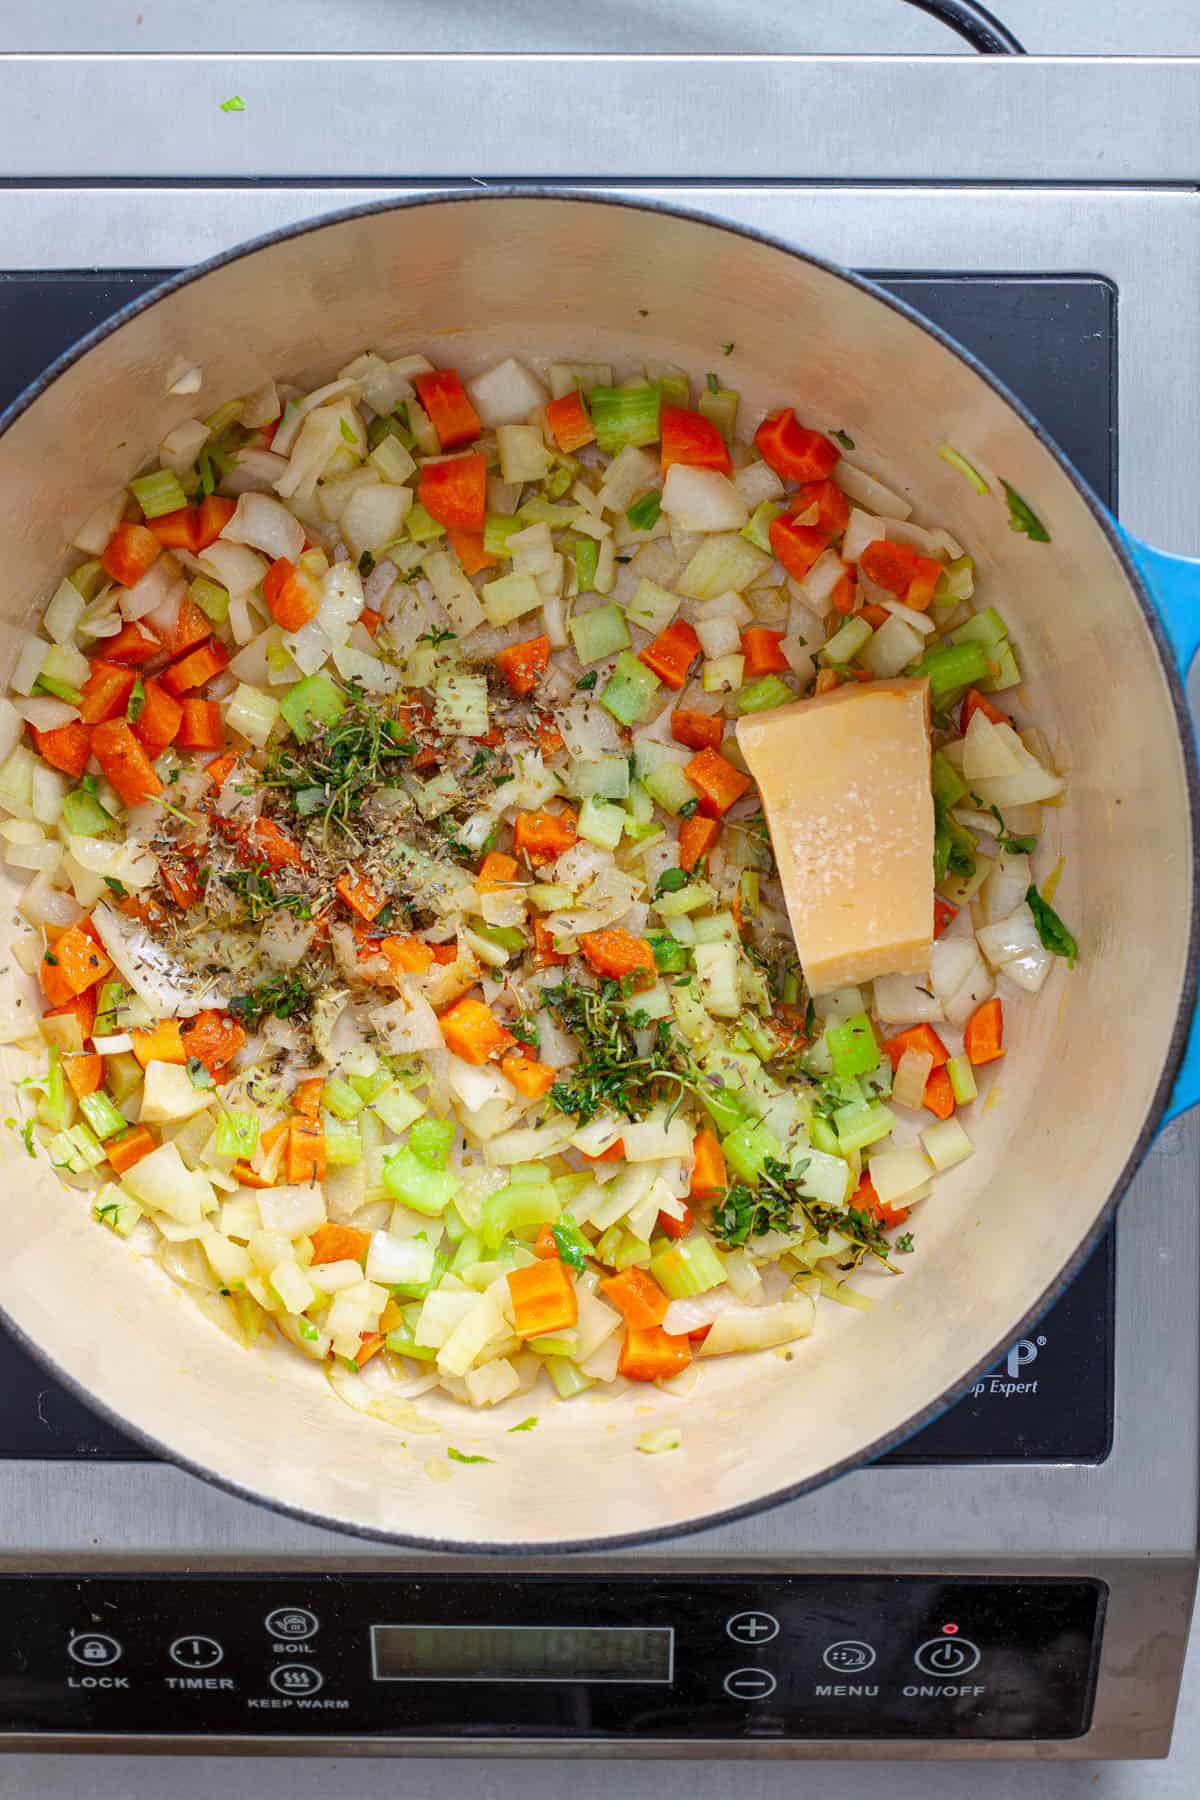 A Dutch oven with vegetables, herbs and parmesan cheese rind cooking.